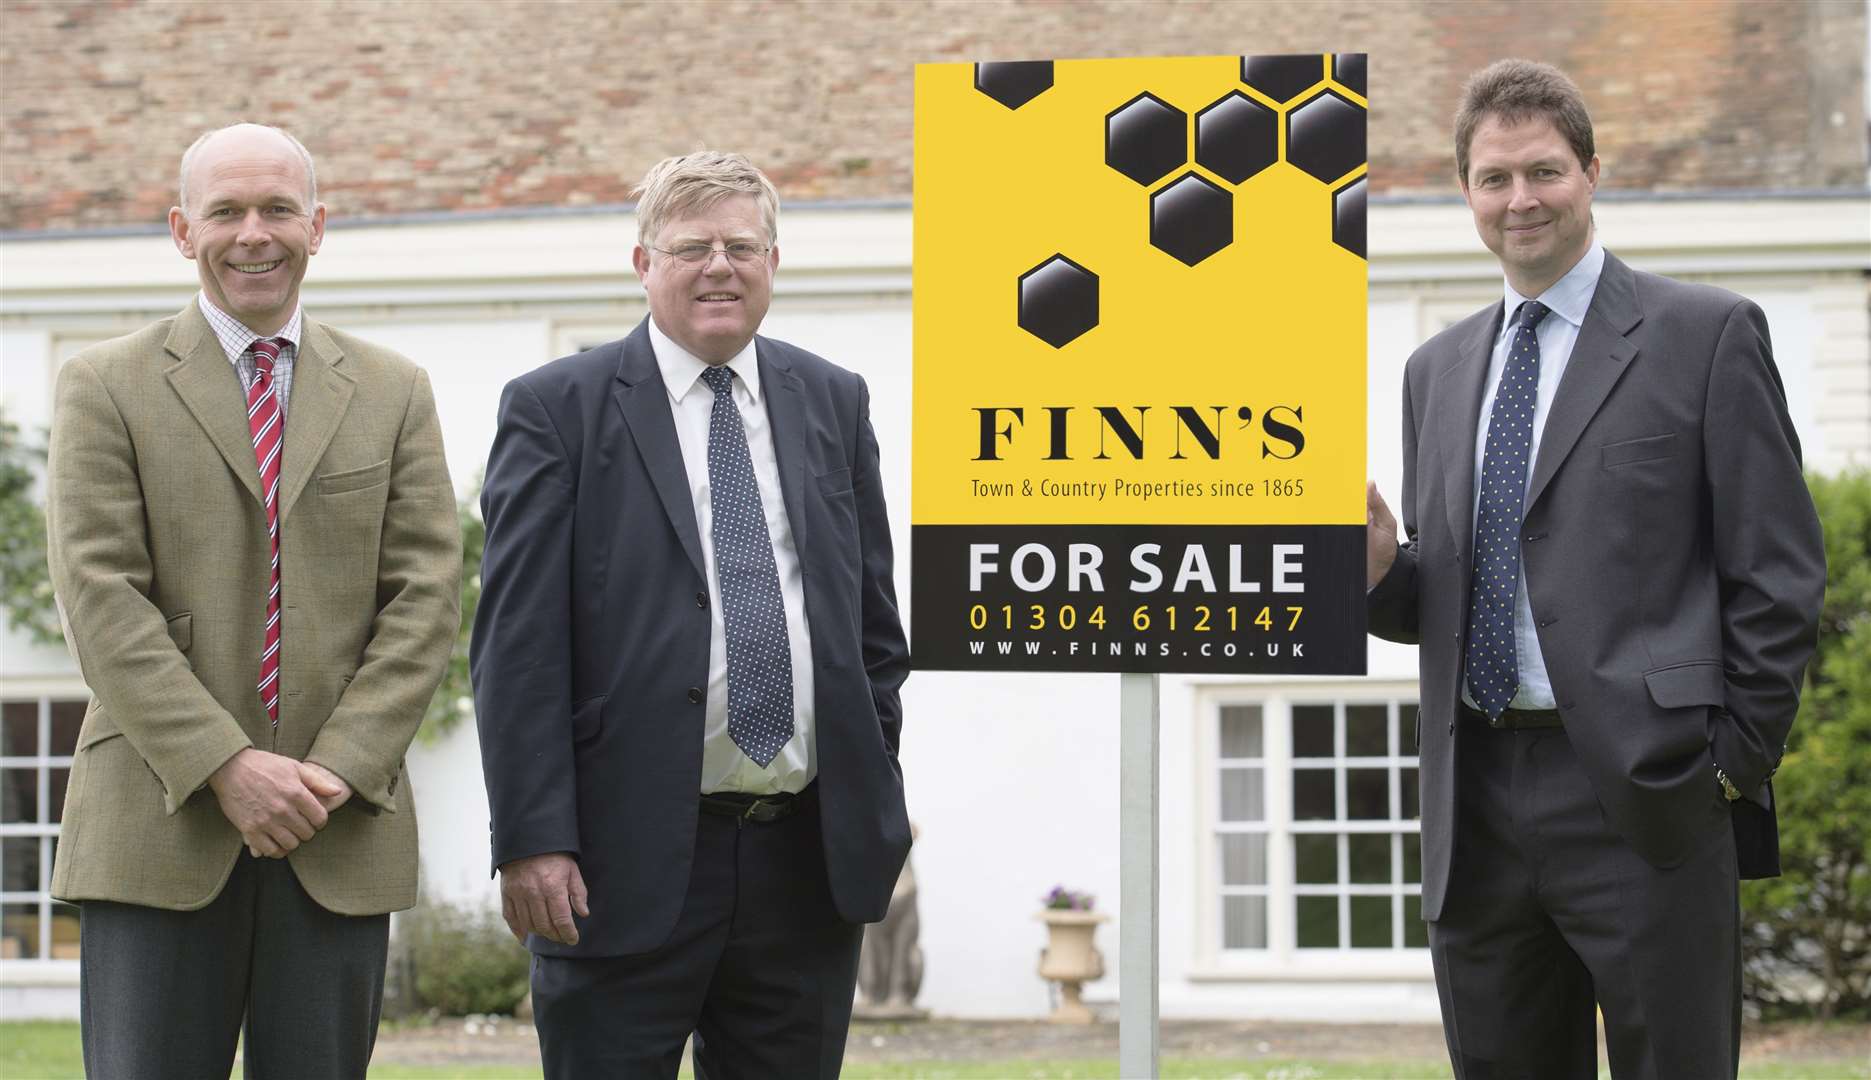 From left, Finn's partners Jim Pace, Julian Sampson and Nick Rooke with one of the firm's new property boards